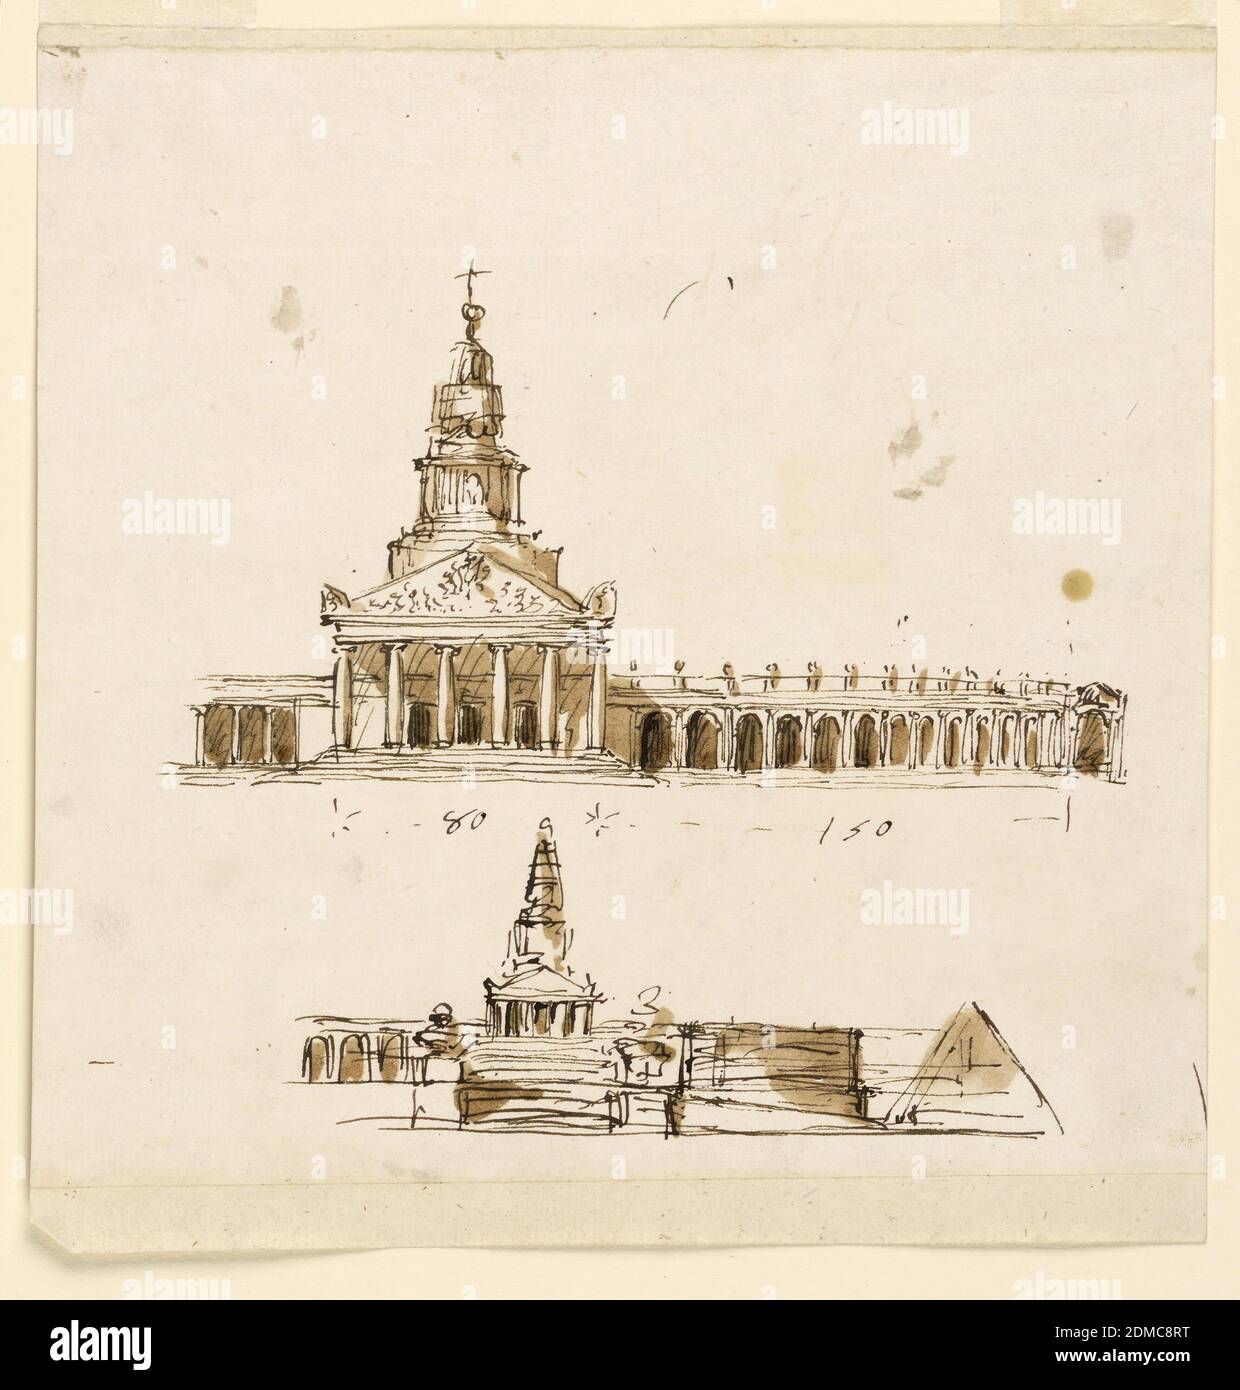 Elevations of a Mausoleum, Giuseppe Barberi, Italian, 1746–1809, Pen and brown ink, brush and brown wash on lined off-white laid paper, Top: an obelisk raises upon a pedestal above a Doric temple front. Three doorways lead into the interior of the building which is flanked by colonnades. Shown is somewhat more than the right part of the structure. The measurements for the widths are indicated. Bottom: A similar structure as above stands upon a platform, and the building, in turn, stands upon a platform of the height of the entablatures of the colonnades. Pyramids flank the structure. Stock Photo